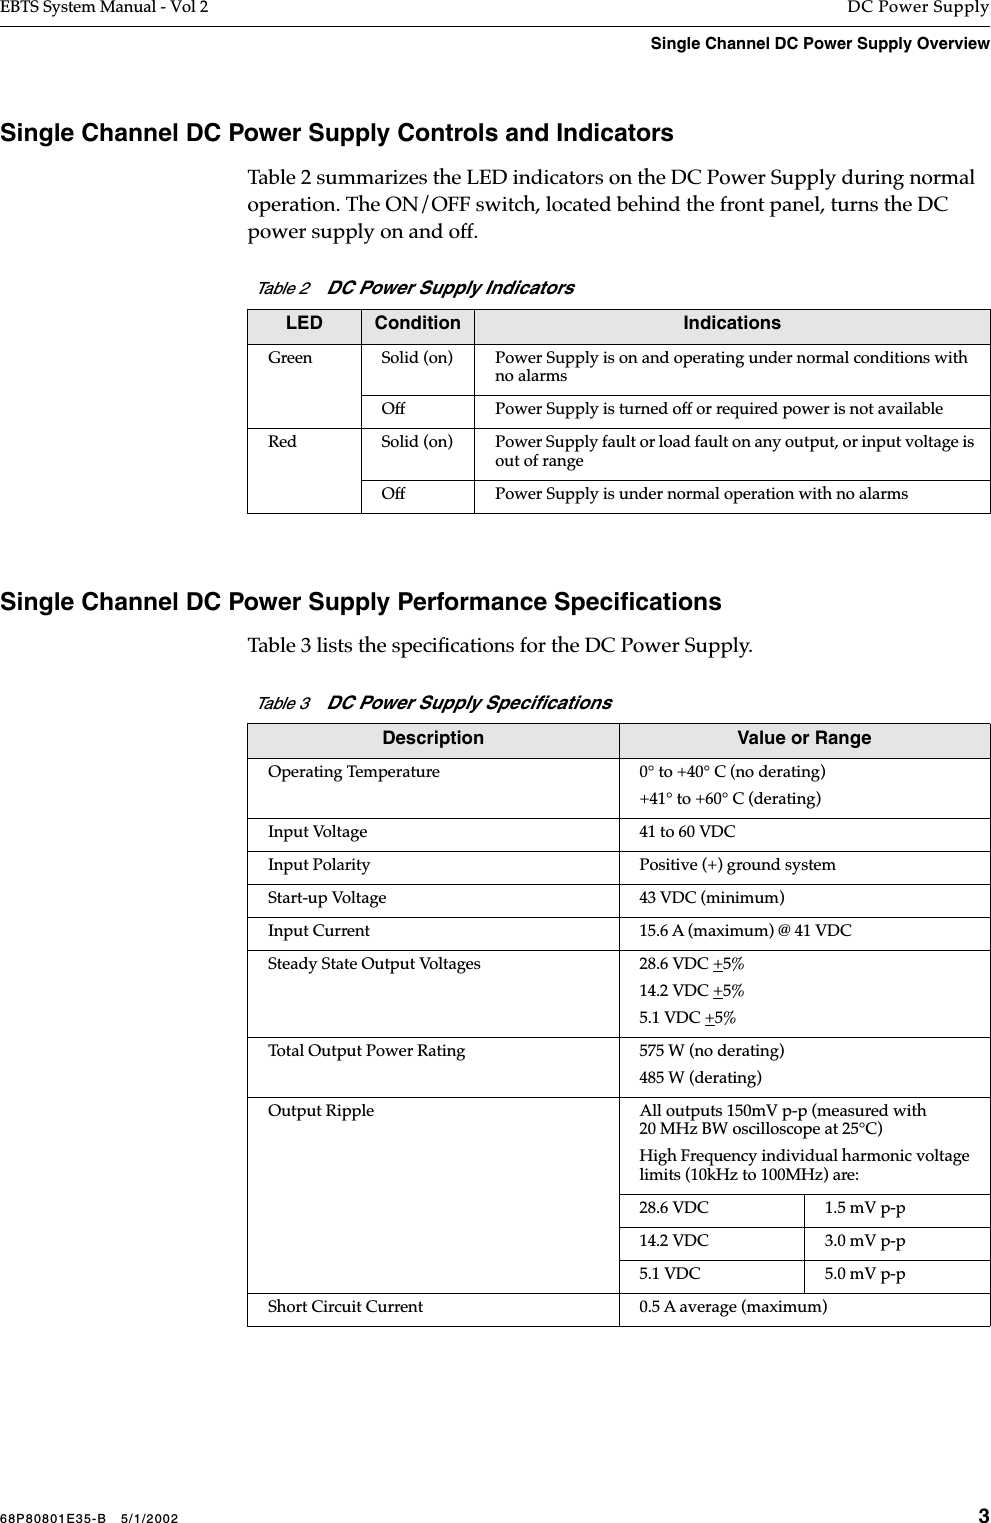 68P80801E35-B   5/1/2002 3EBTS System Manual - Vol 2 DC Power SupplySingle Channel DC Power Supply Overview Single Channel DC Power Supply Controls and IndicatorsTable 2 summarizes the LED indicators on the DC Power Supply during normal operation. The ON/OFF switch, located behind the front panel, turns the DC power supply on and off.Single Channel DC Power Supply Performance Speciﬁcations Table 3 lists the speciﬁcations for the DC Power Supply.Table 2    DC Power Supply IndicatorsLED Condition IndicationsGreen Solid (on) Power Supply is on and operating under normal conditions with no alarmsOff Power Supply is turned off or required power is not availableRed Solid (on) Power Supply fault or load fault on any output, or input voltage is out of rangeOff Power Supply is under normal operation with no alarmsTable 3    DC Power Supply Speciﬁcations  Description Value or RangeOperating Temperature 0° to +40° C (no derating)+41° to +60° C (derating)Input Voltage 41 to 60 VDCInput Polarity Positive (+) ground systemStart-up Voltage 43 VDC (minimum)Input Current 15.6 A (maximum) @ 41 VDCSteady State Output Voltages 28.6 VDC +5%14.2 VDC +5%5.1 VDC +5%Total Output Power Rating 575 W (no derating)485 W (derating)Output Ripple All outputs 150mV p-p (measured with 20 MHz BW oscilloscope at 25°C)High Frequency individual harmonic voltage limits (10kHz to 100MHz) are:28.6 VDC 1.5 mV p-p14.2 VDC  3.0 mV p-p5.1 VDC 5.0 mV p-pShort Circuit Current 0.5 A average (maximum)